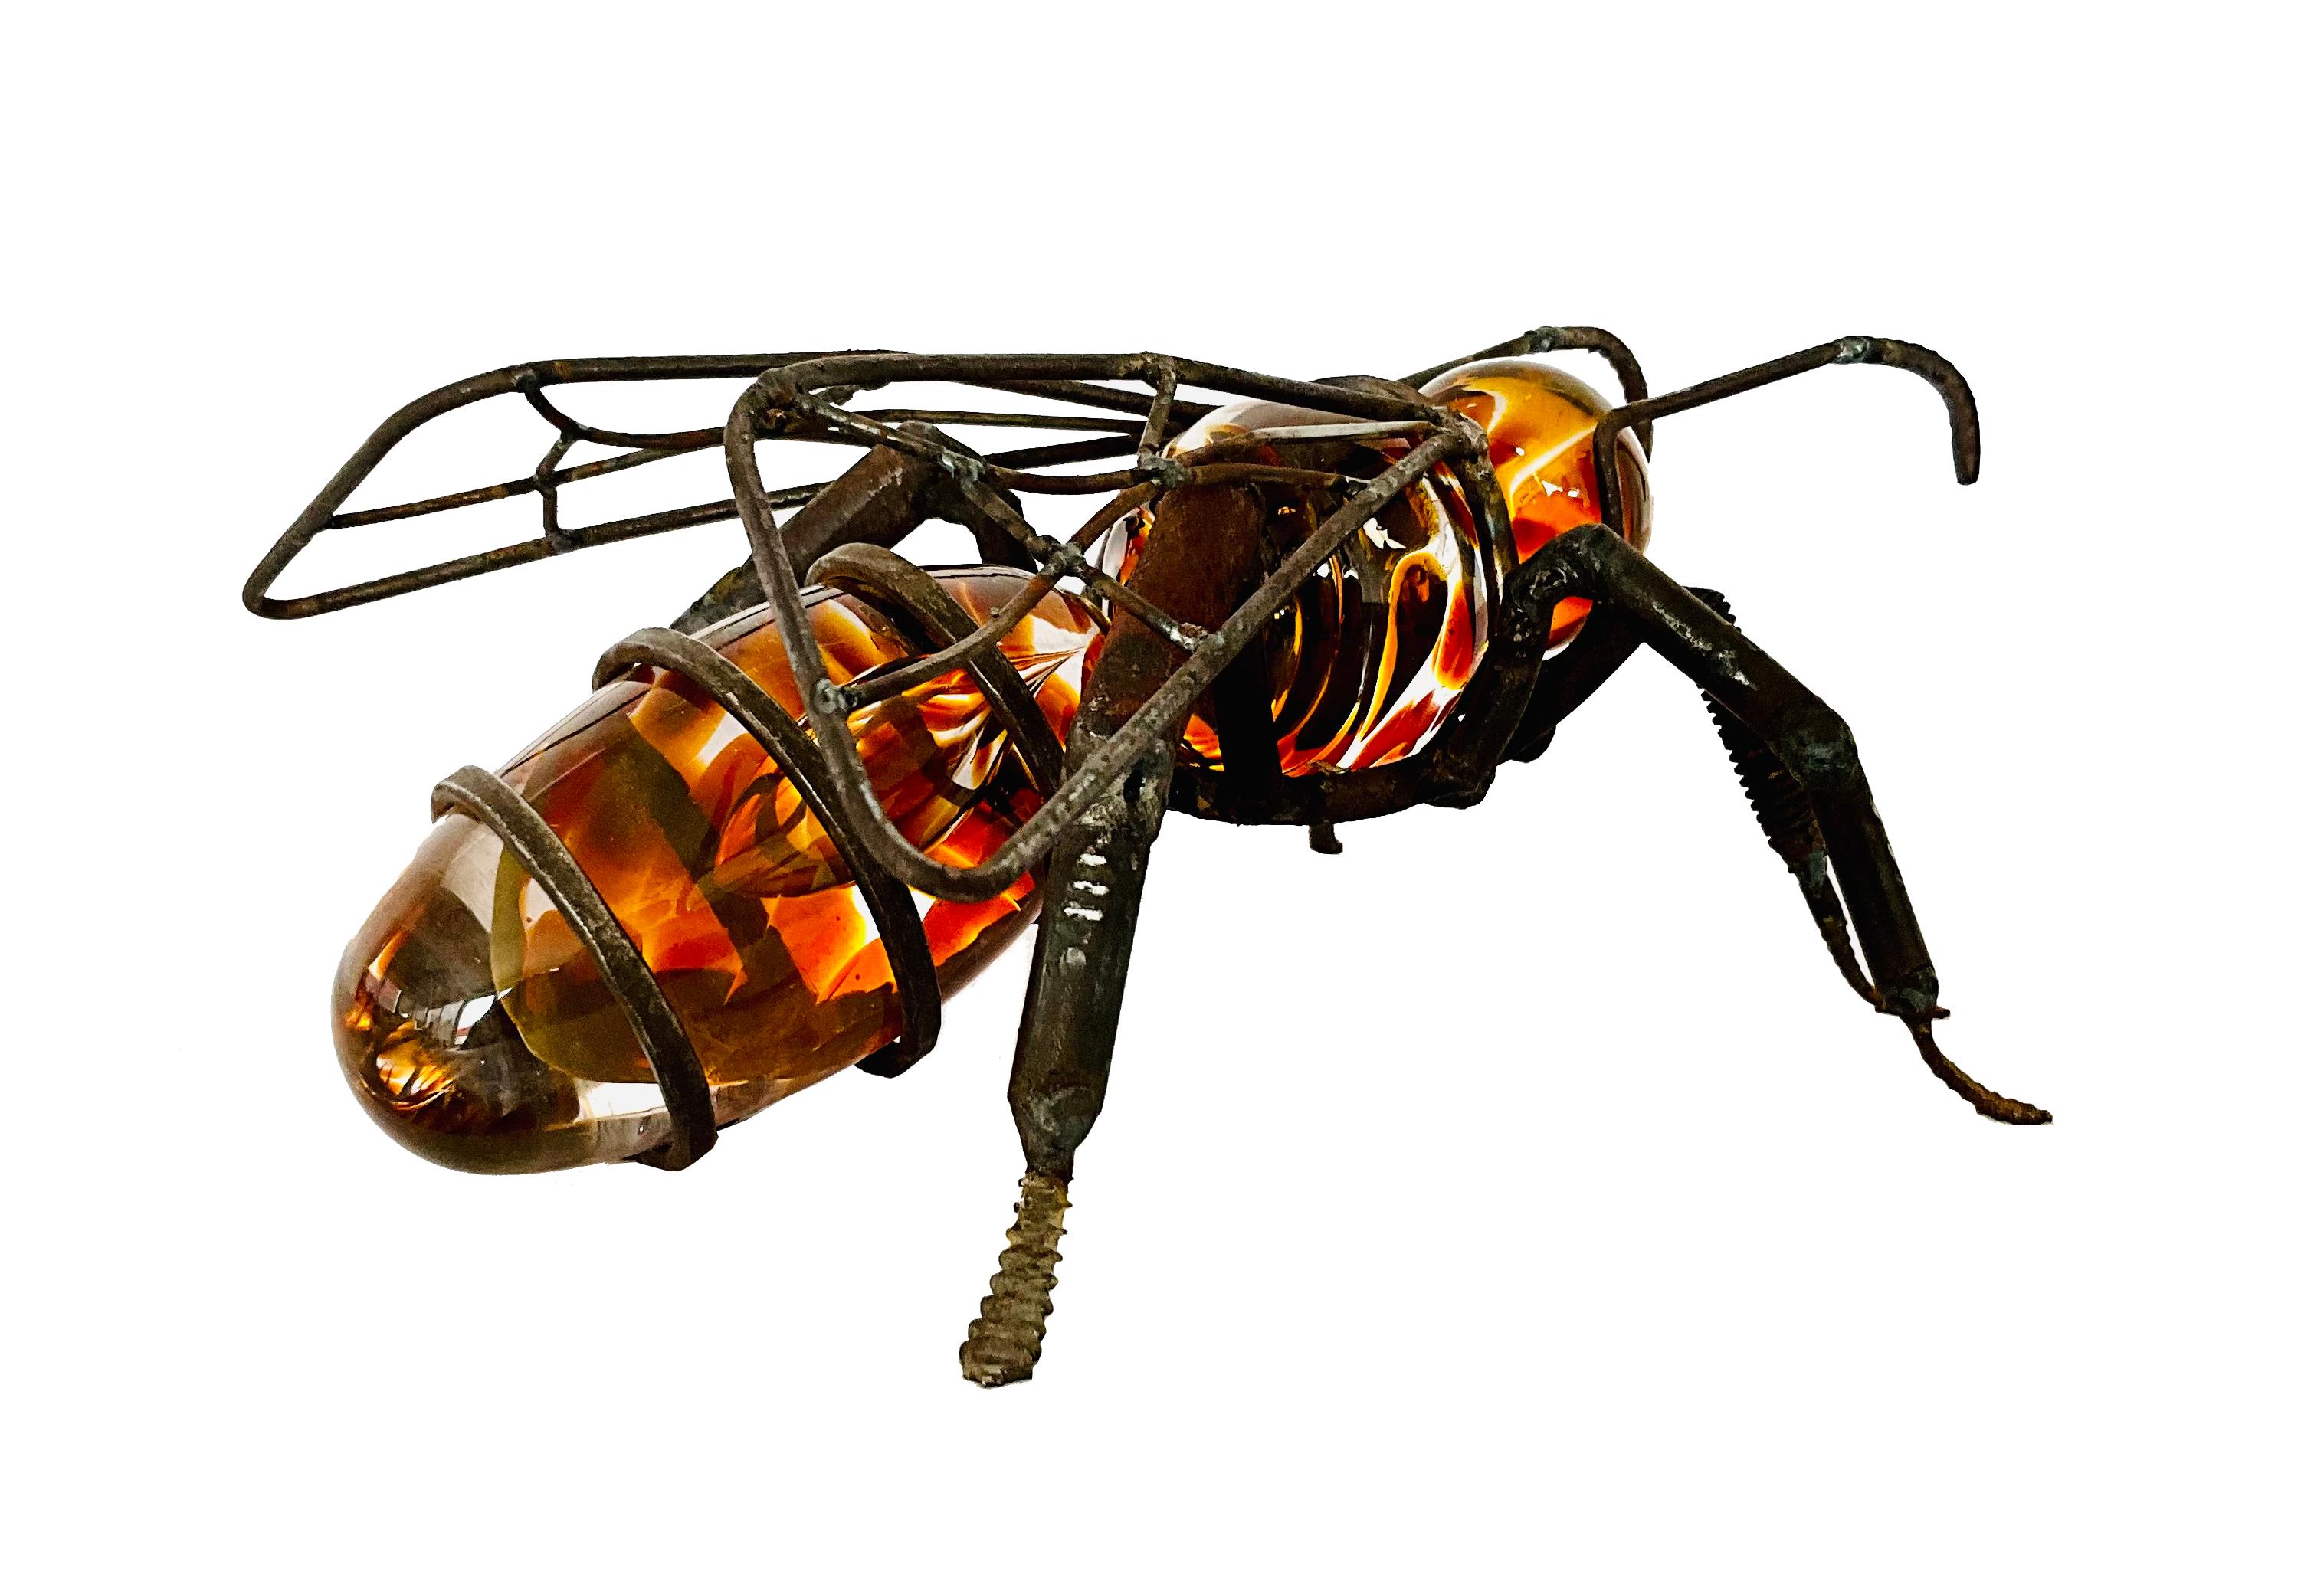 THE BEE

The sculpture by Marcos Romero, representing an bee made of recycled industrial iron and blown glass, is a fascinating work of contemporary art. Romero has created a piece that combines the hardness and resistance of metal with the